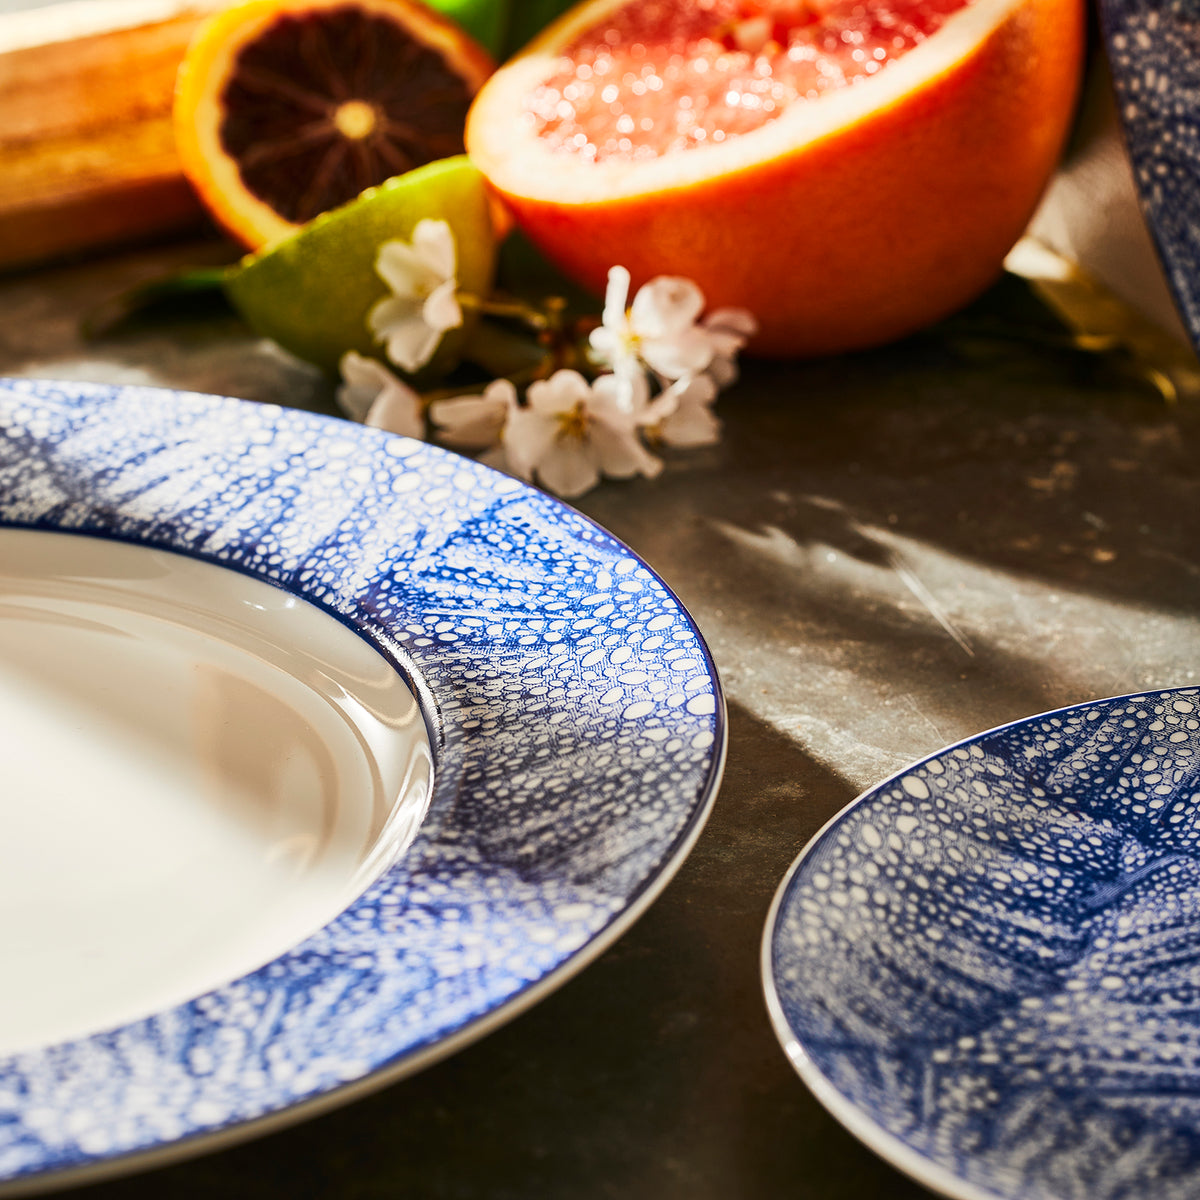 Detail photo of the Sea Fan Canapé plate and rimmed dinner plate from Caskata.